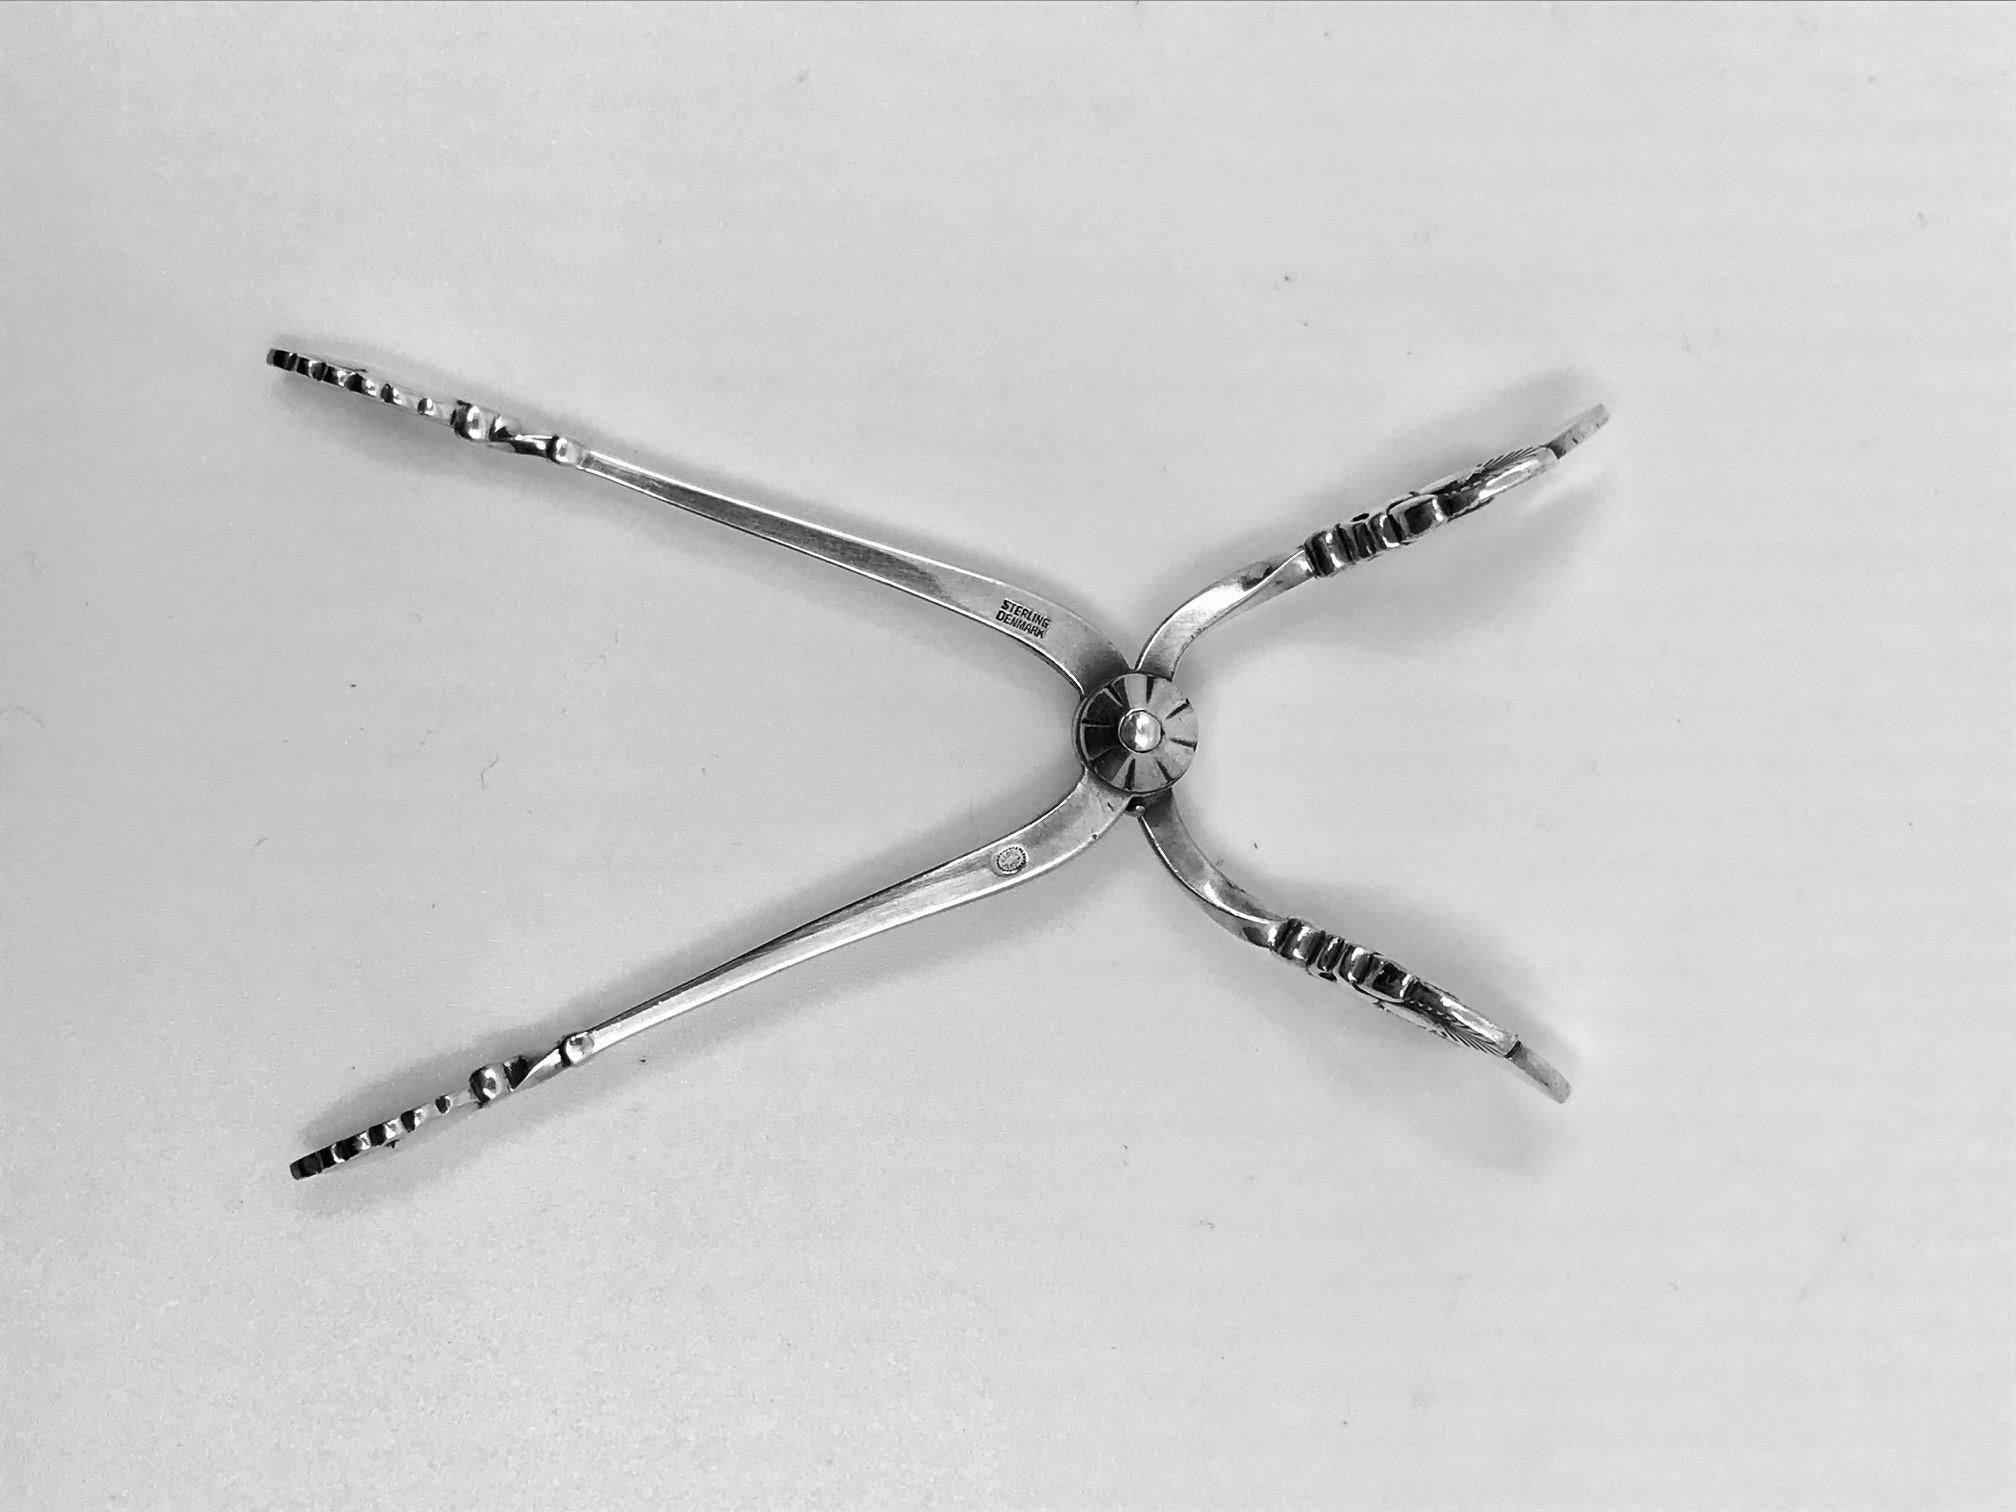 Sterling silver Georg Jensen sugar tongs, item 174 in the very rare Bittersweet pattern, design #79 by Gundorph Albertus from 1940. This is the sister pattern to Albertus’ famous Cactus pattern.

Additional information:
Material: Sterling